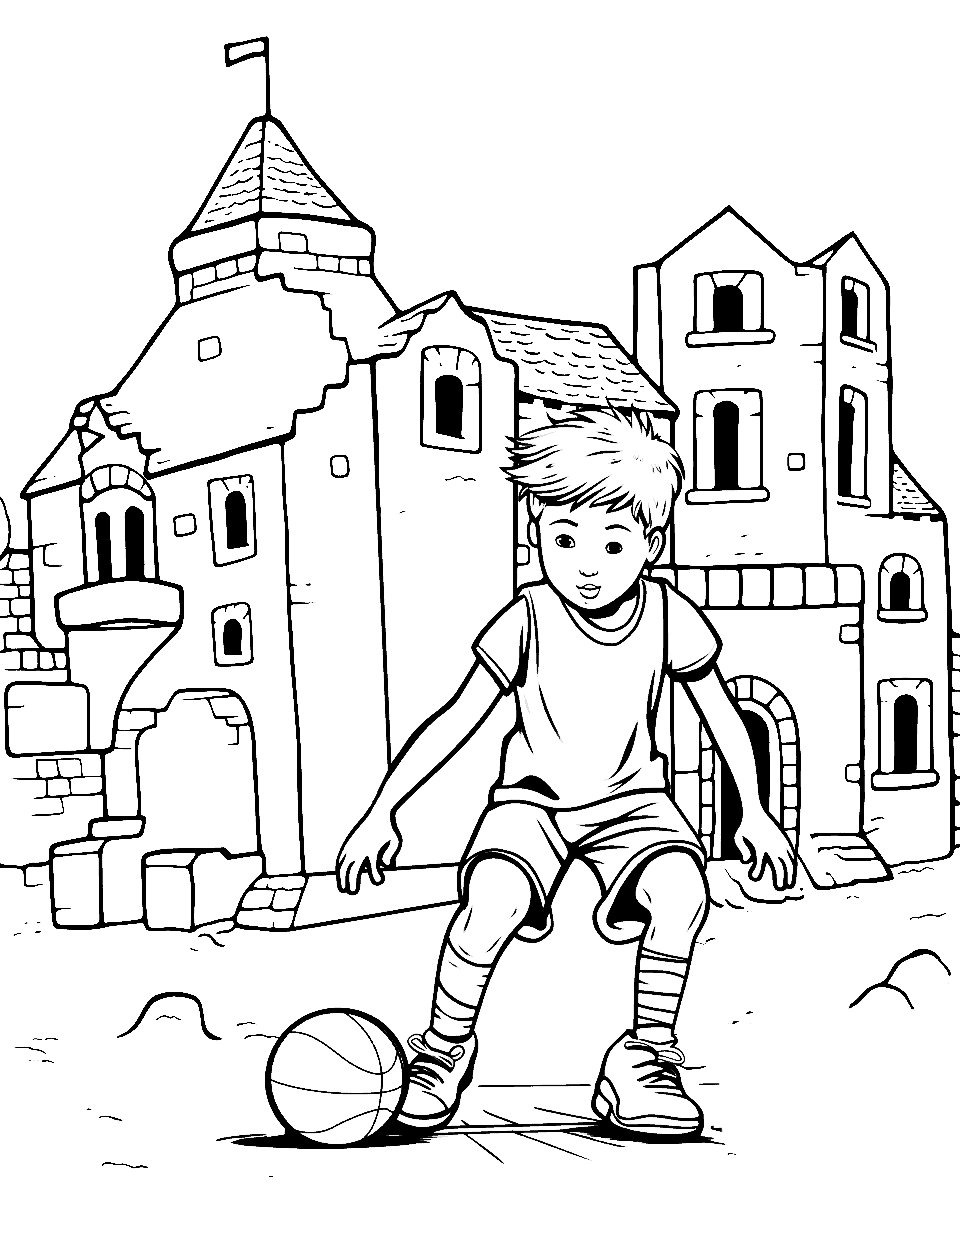 Medieval Castle Court Basketball Coloring Page - A European medieval scene with a kid playing basketball in a castle courtyard.